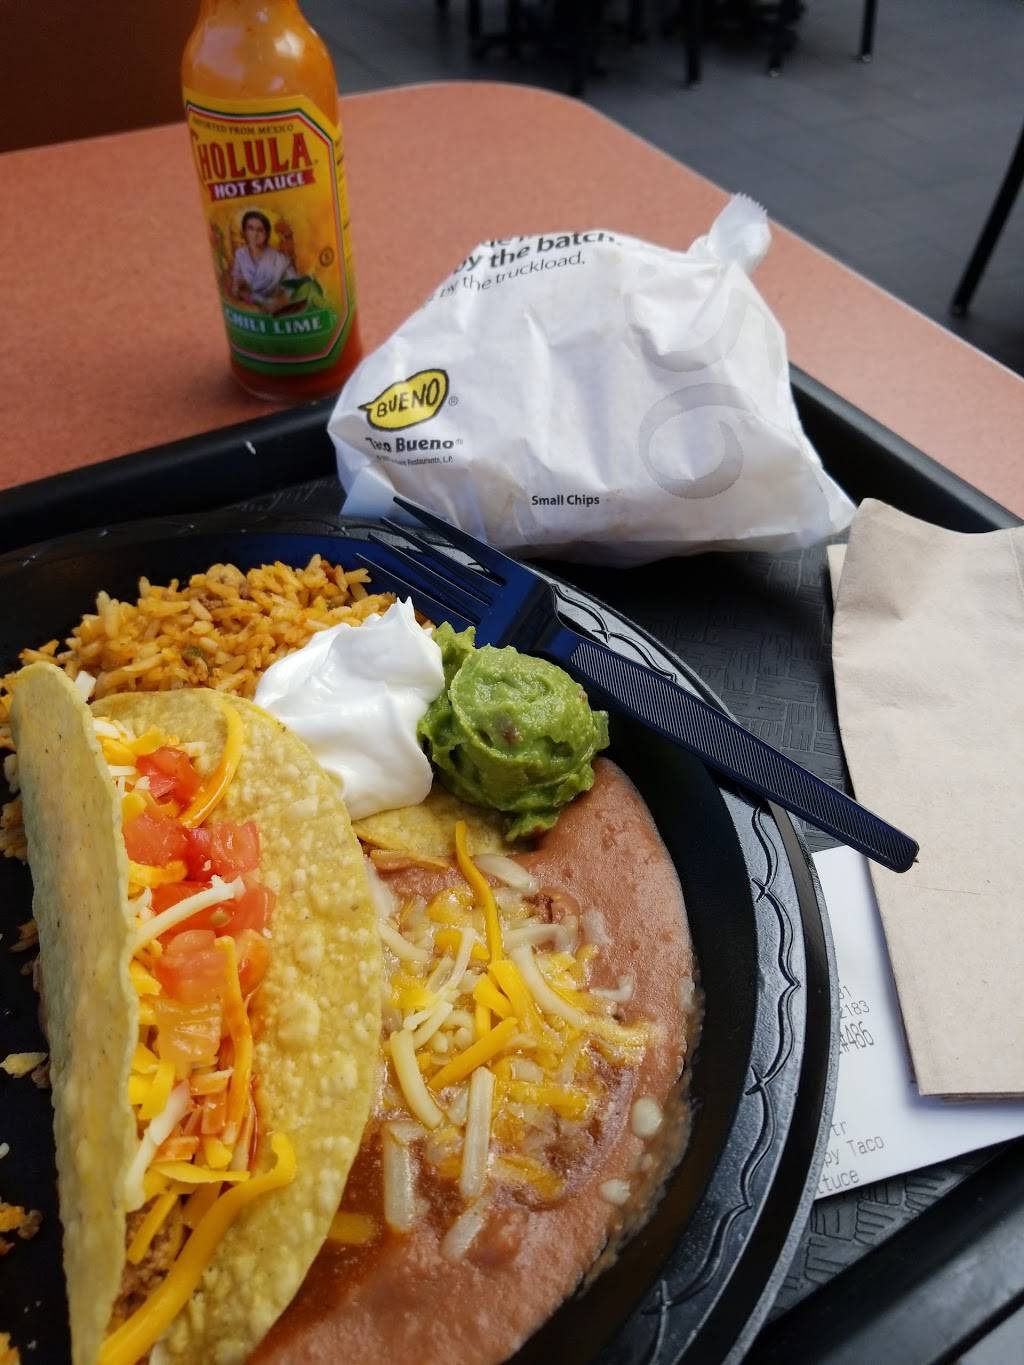 Taco Bueno | 3204 SE Loop 820, Forest Hill, TX 76140, USA | Phone: (817) 293-2183